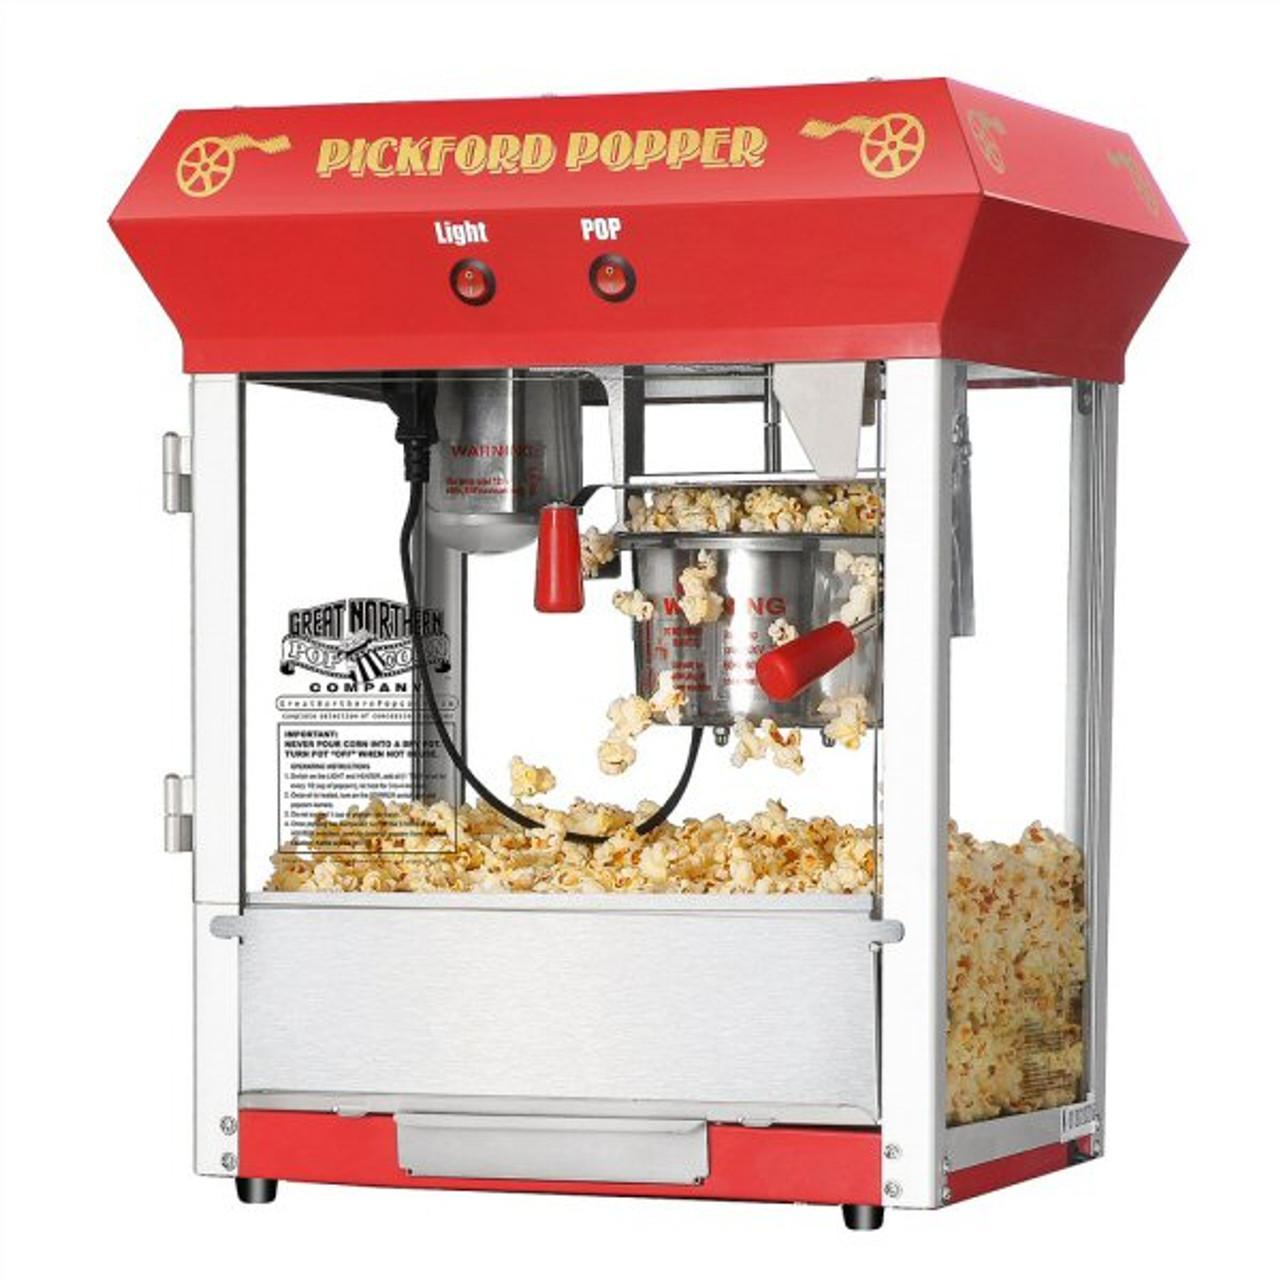 Good Time Countertop Popcorn Machine with 8 Ounce Kettle - Red